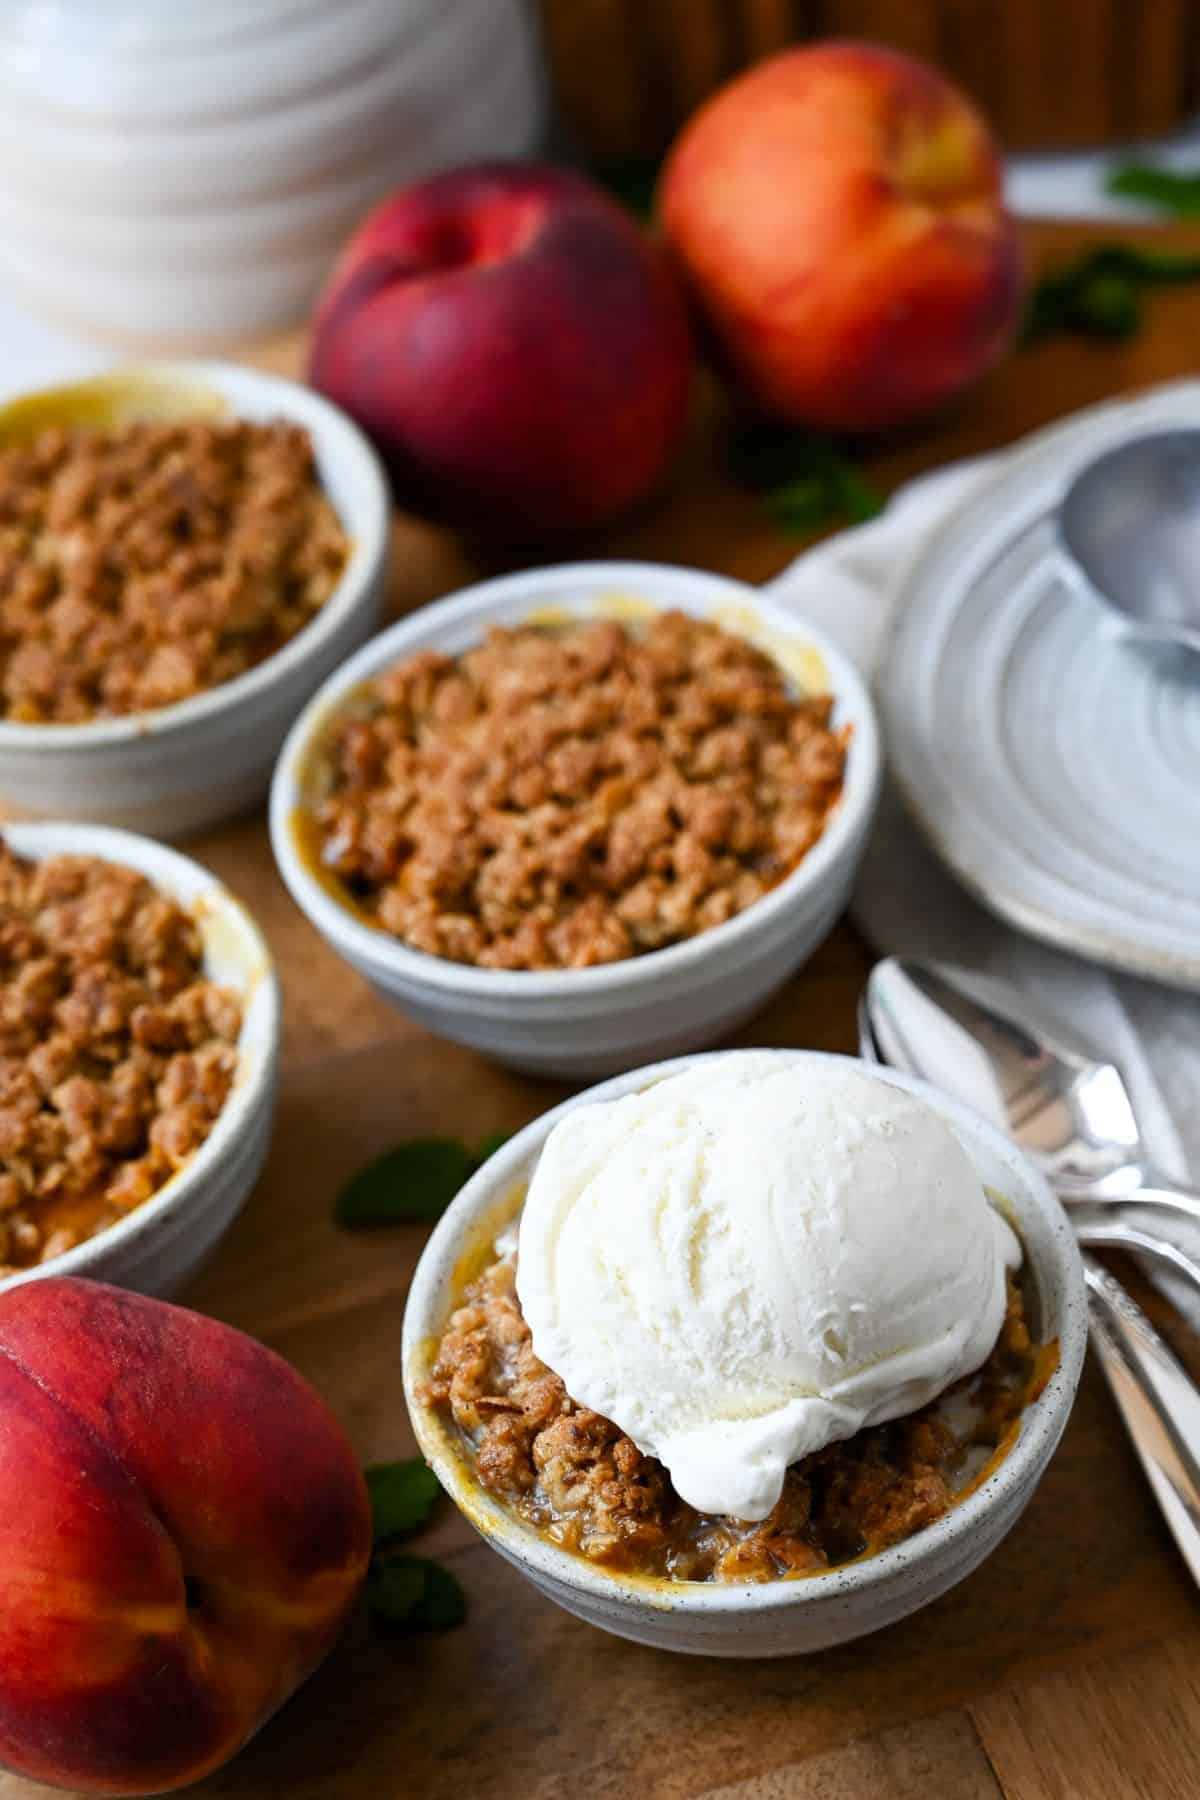 a peach next to a dish of peach crumble topped with a scoop of ice cream 